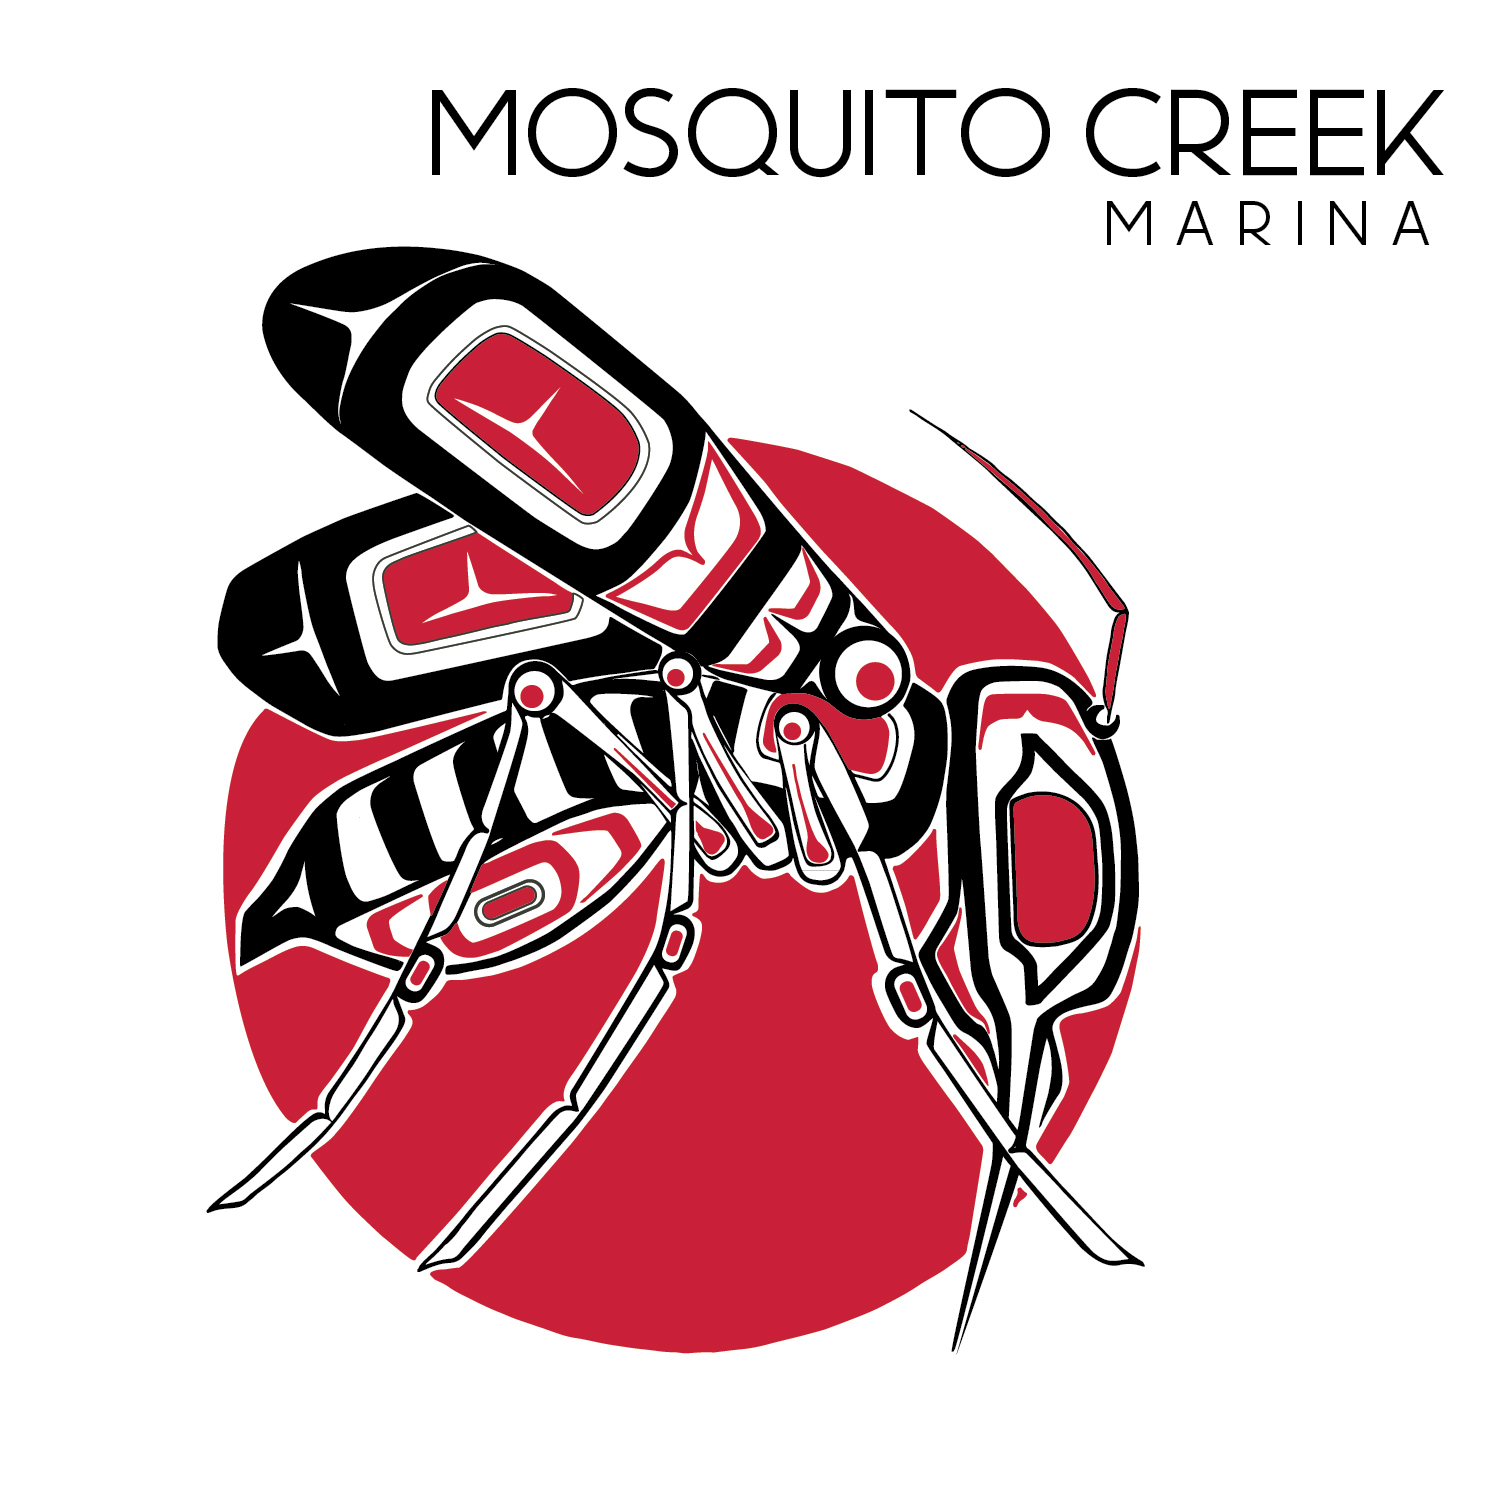 MOSQUITO CREEK MARINA SQUAMISH NATION by bl3nd design graphic design agency in abbotsford british columbia canada